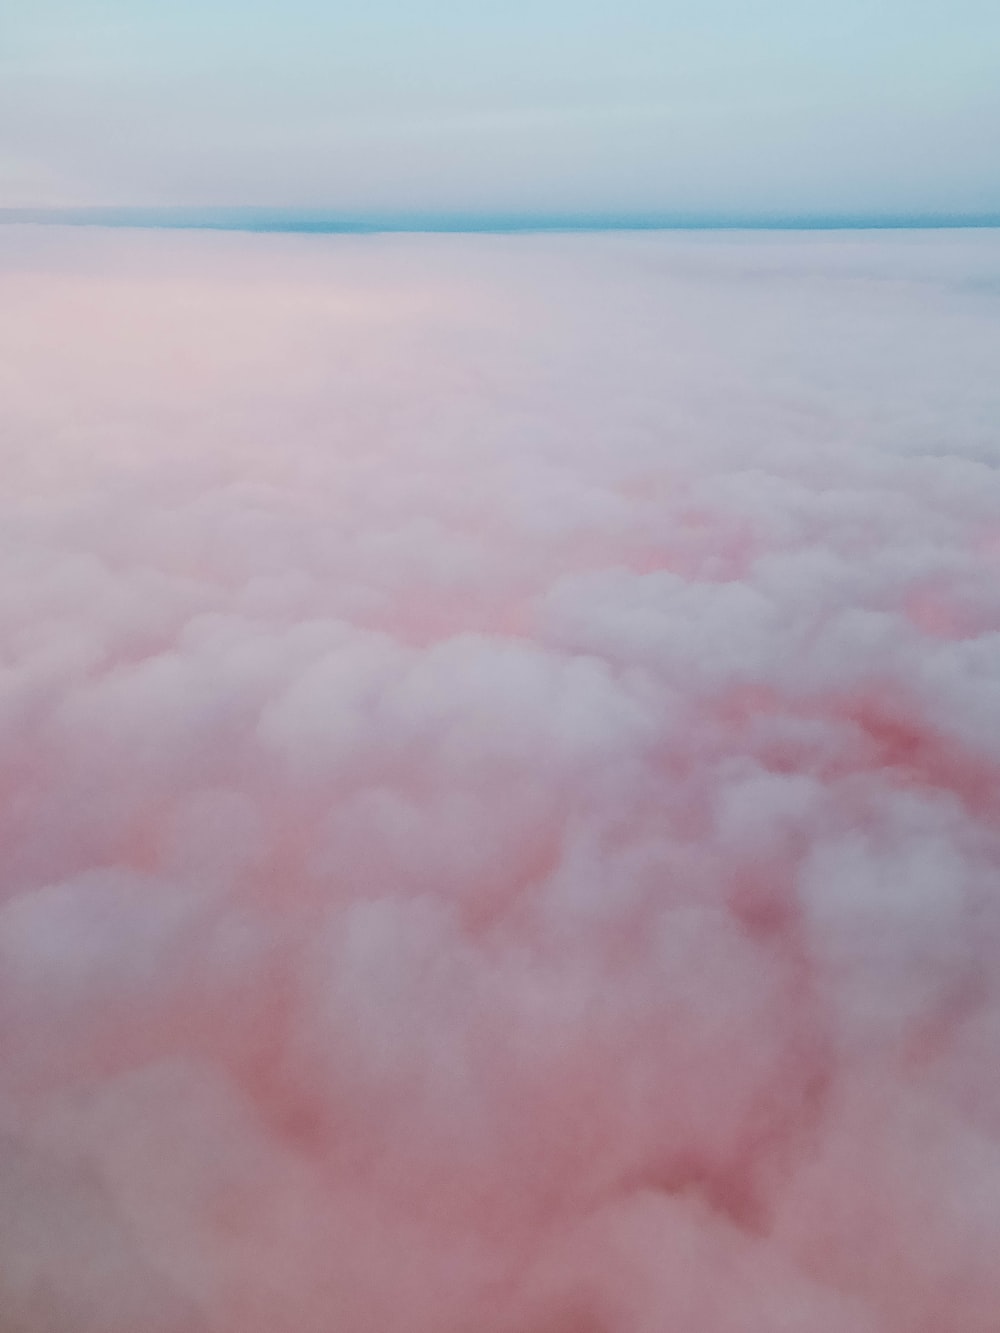 Cotton Candy Picture. Download Free Image